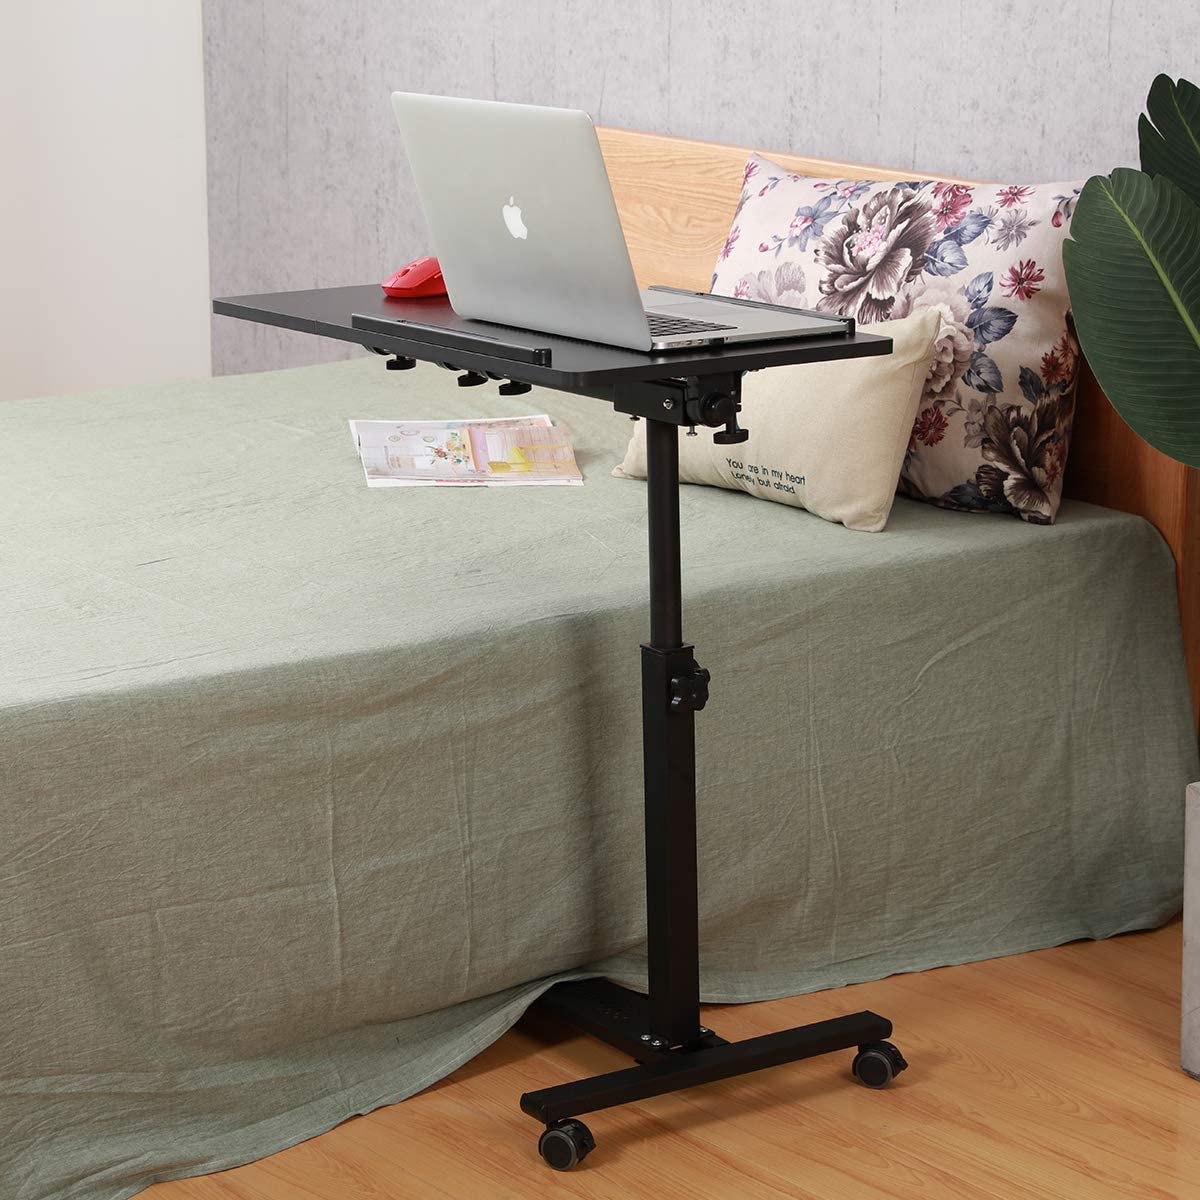 Over Bed Table with Wheels Adjustable | Rolling Laptop Table Overbed Desk Hospital Tray Table Black